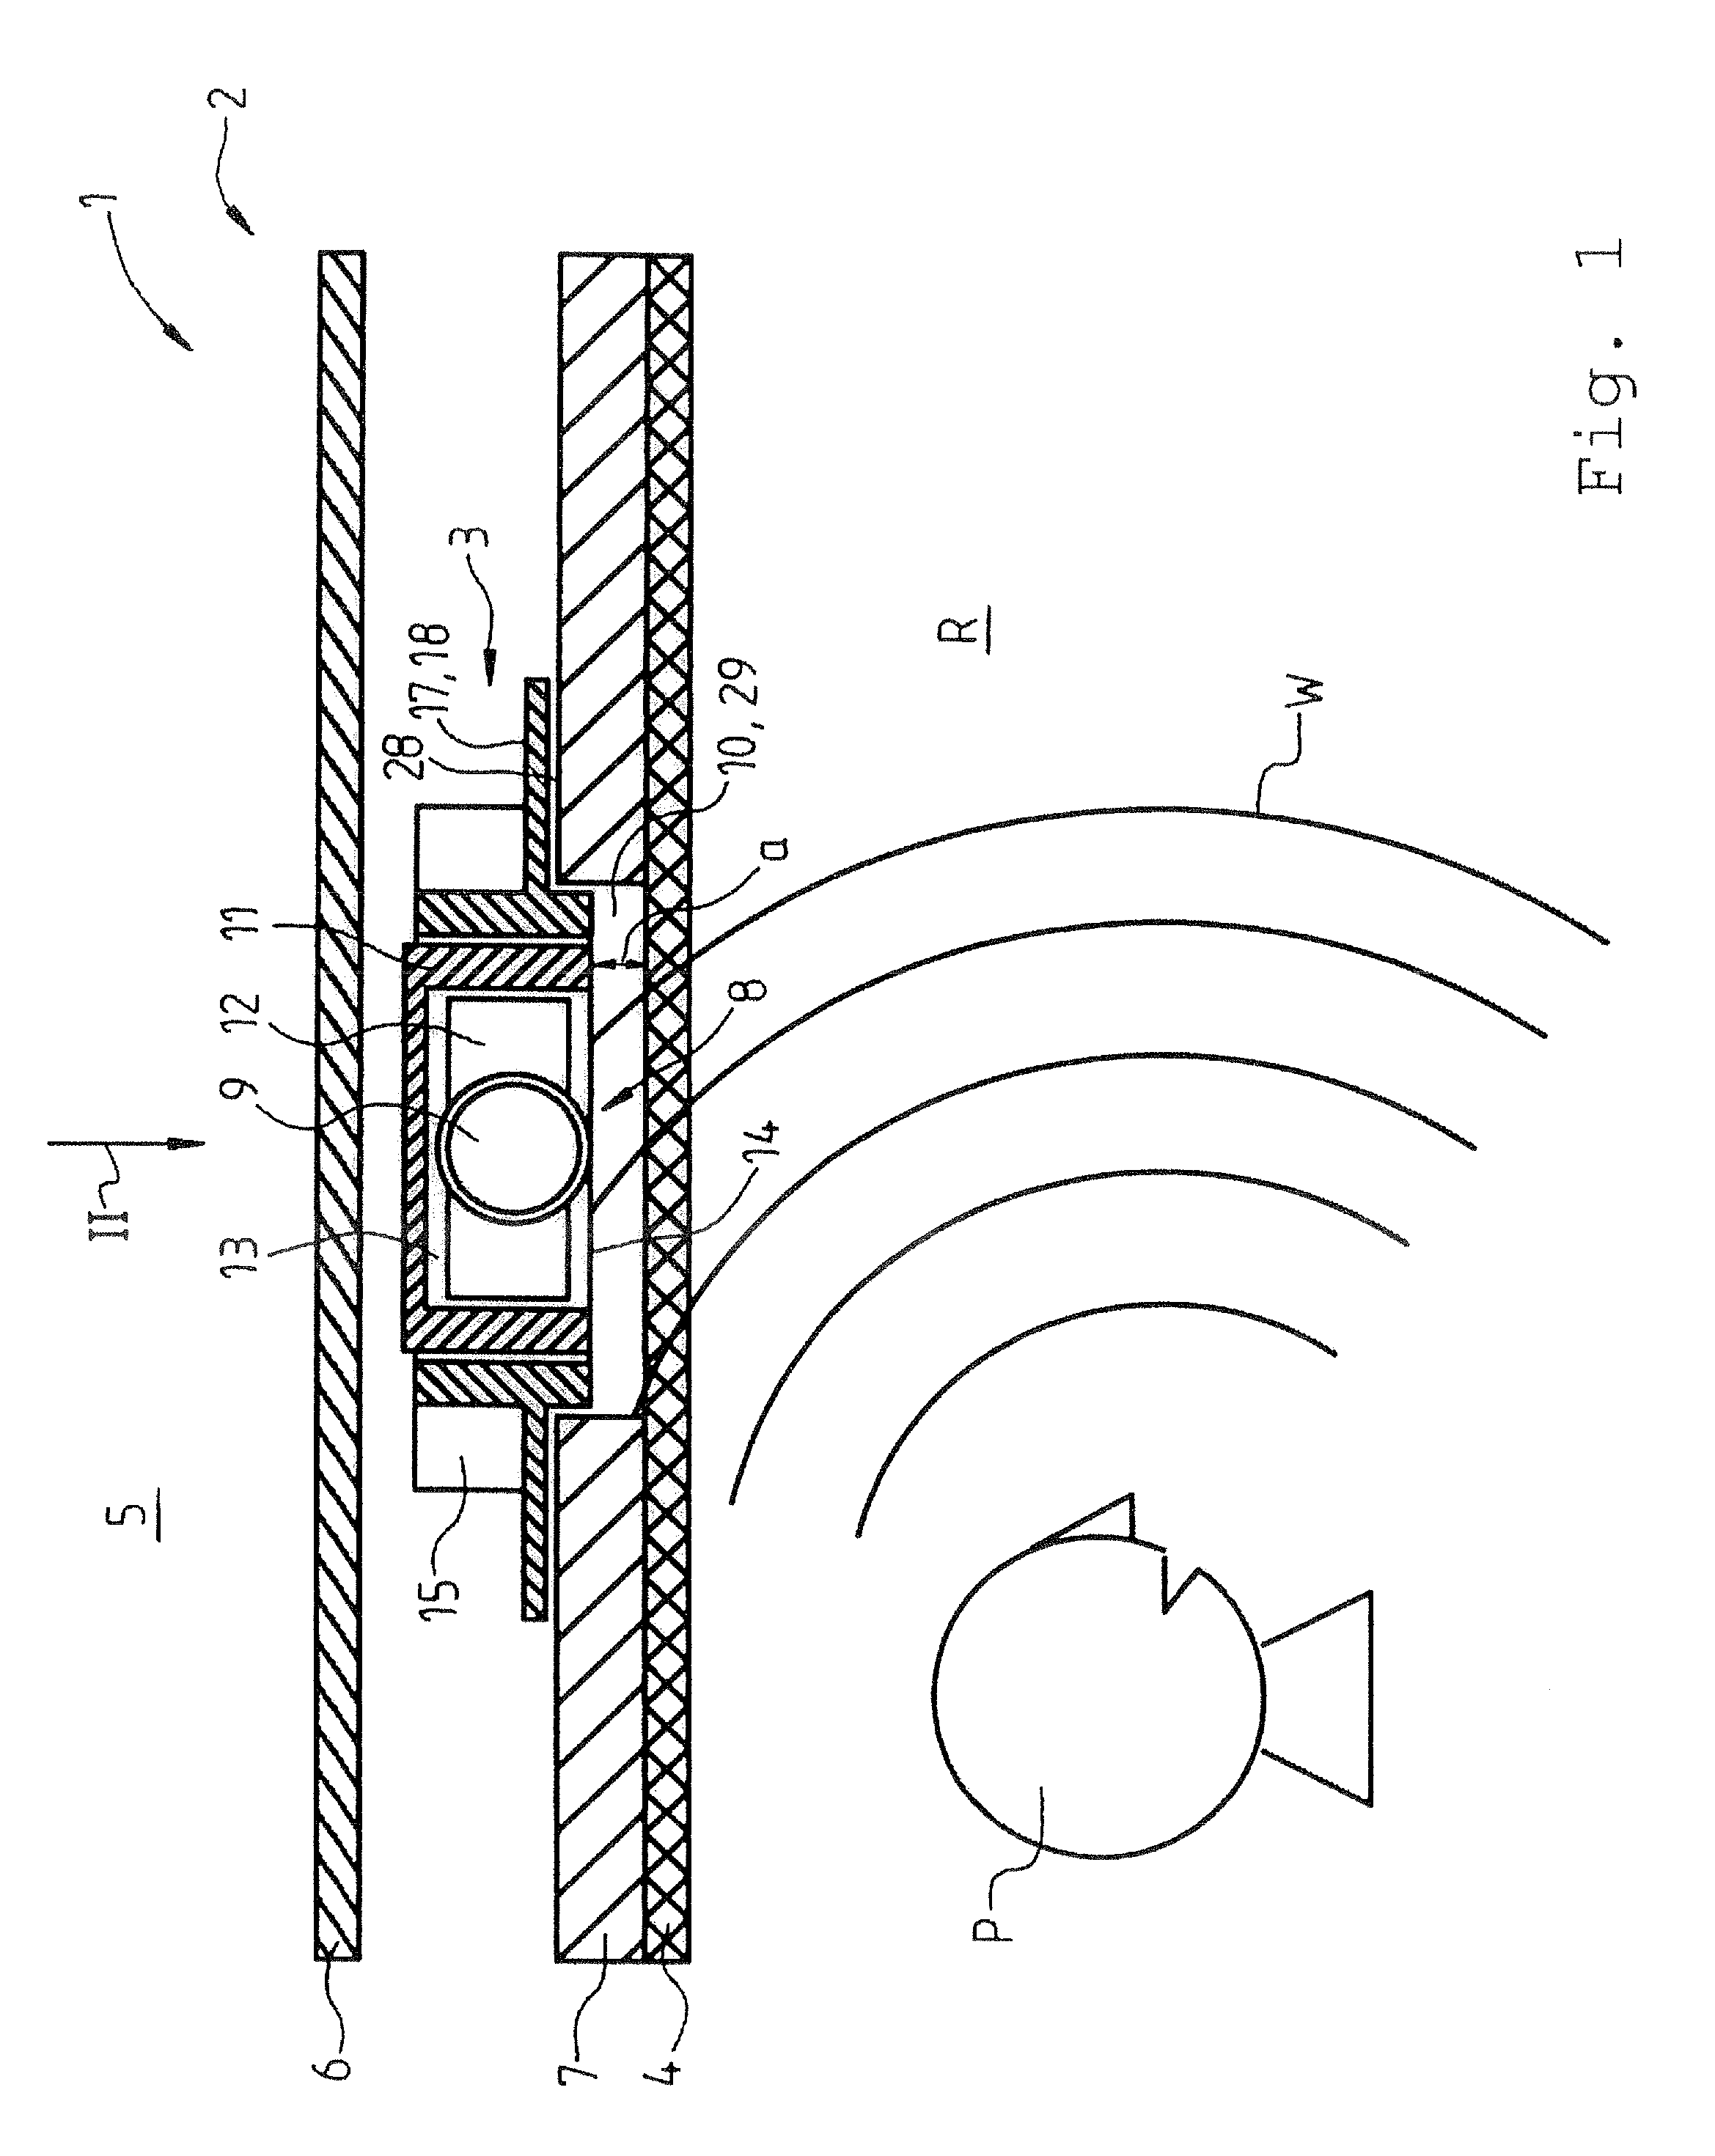 Vehicle with a multilayer roof structure and a microphone unit integrated into the roof structure